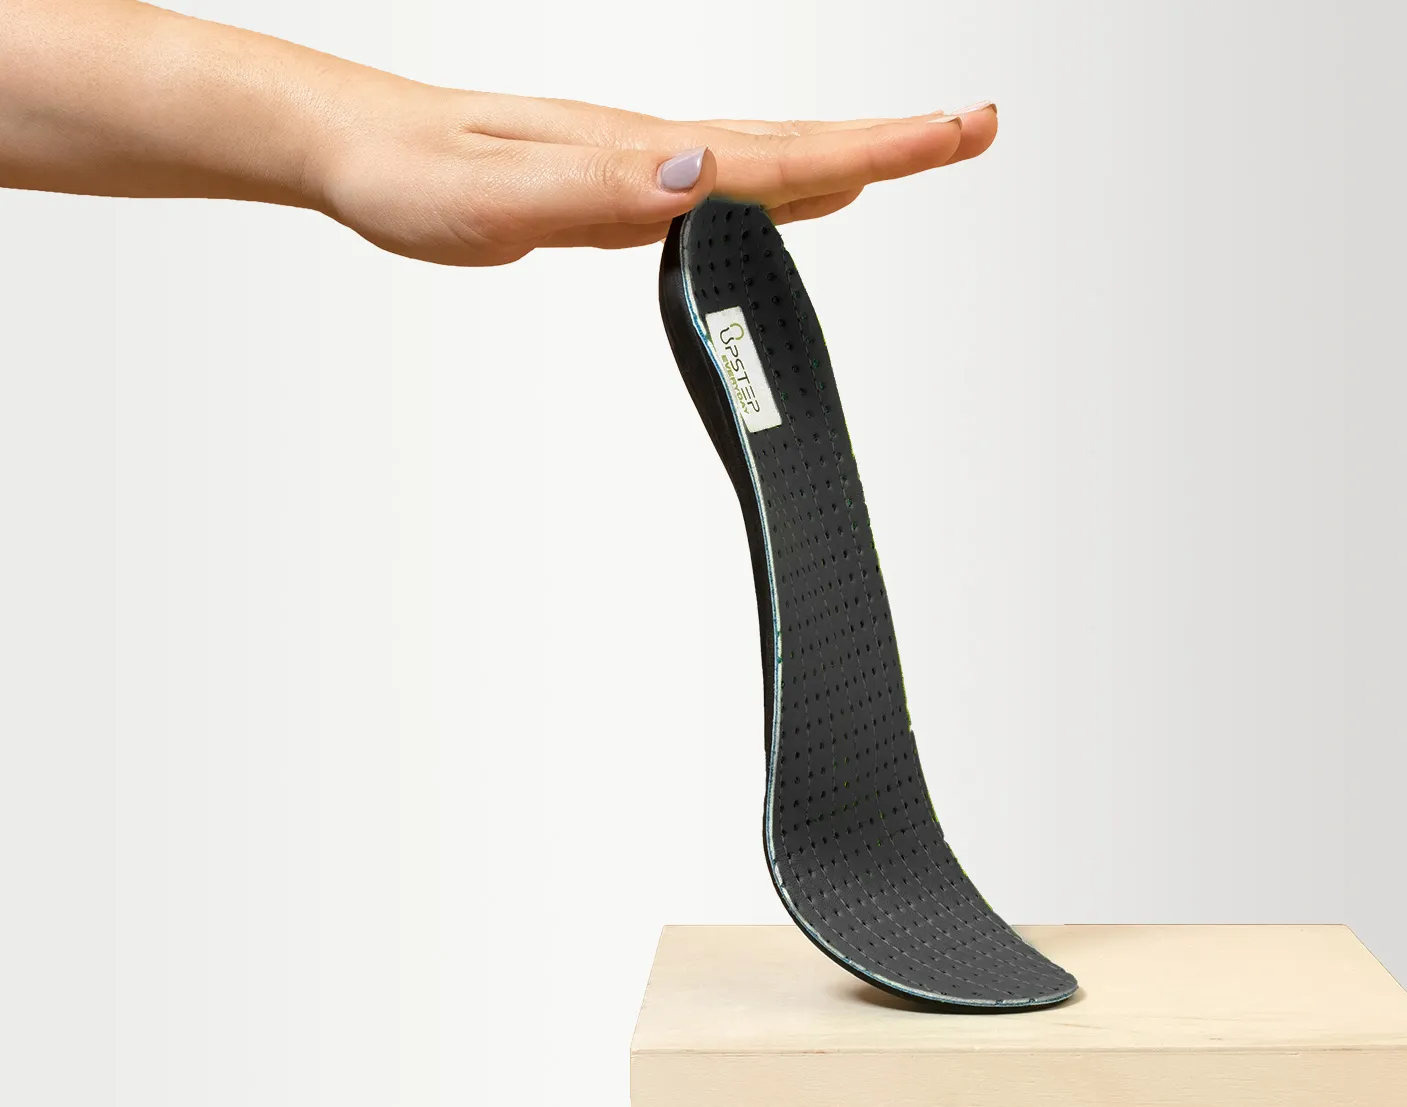 Upstep custom insole for plantar fasciitis positioned upright, seen from the side, slightly bent by hand